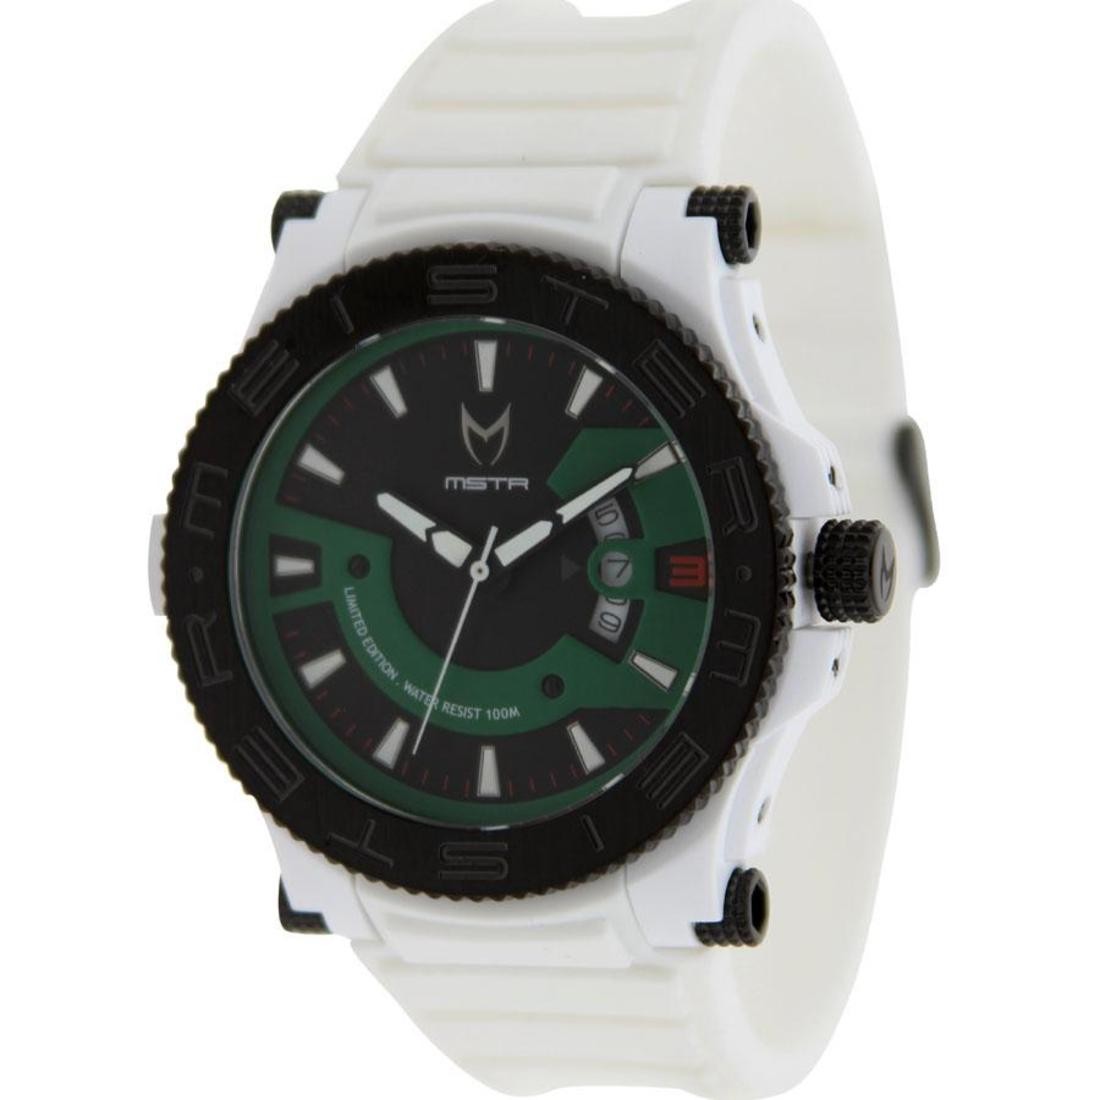 Meister Prodigy With Rubber Band Watch - Brandon Jennings (white) - BAIT Exclusive